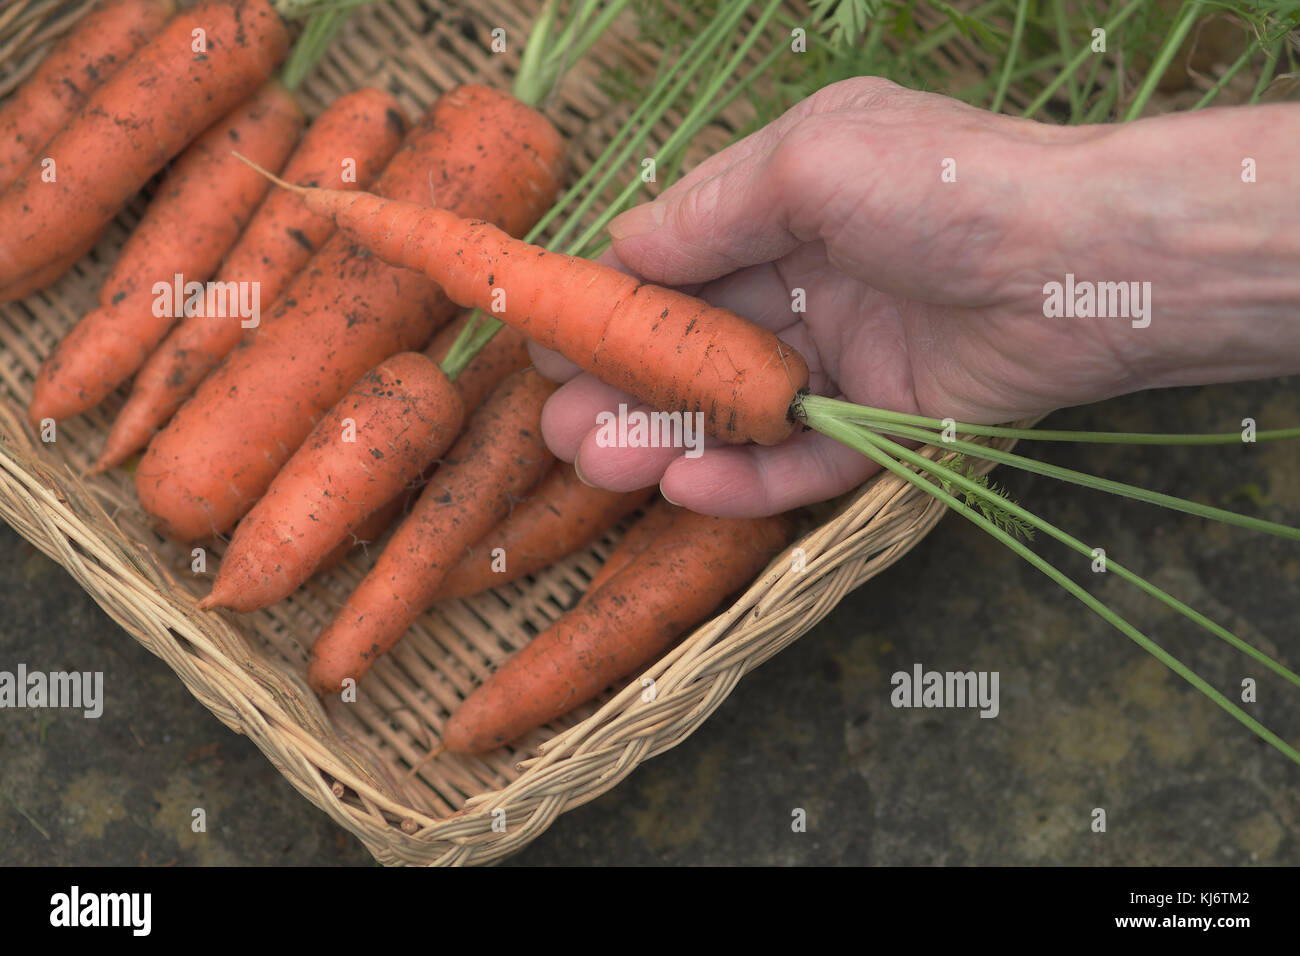 A close up photograph of a hand placing a freshly pulled organically grown carrot in a wicker basket containing several other carrots Stock Photo